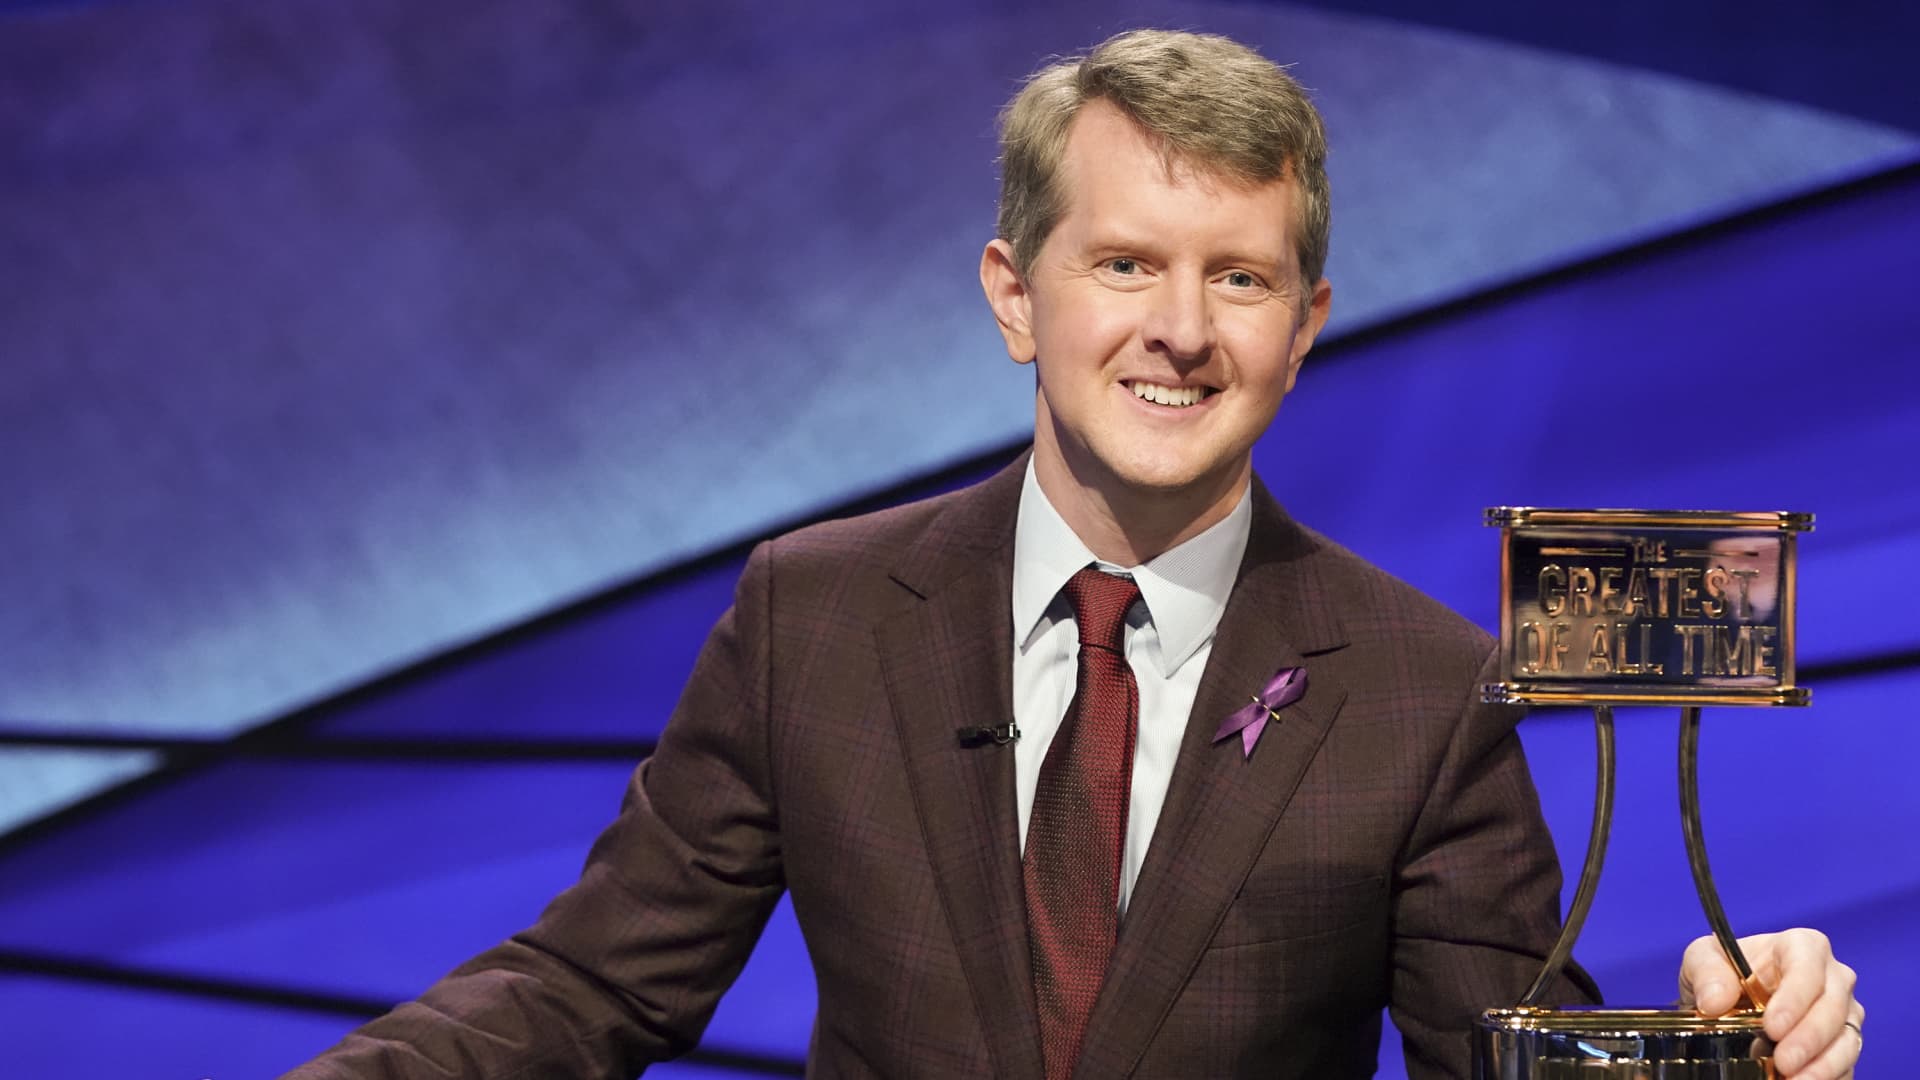 Ken Jennings: On the heels of the iconic Tournament of Champions, JEOPARDY! is coming to ABC in a multiple consecutive night event with JEOPARDY!